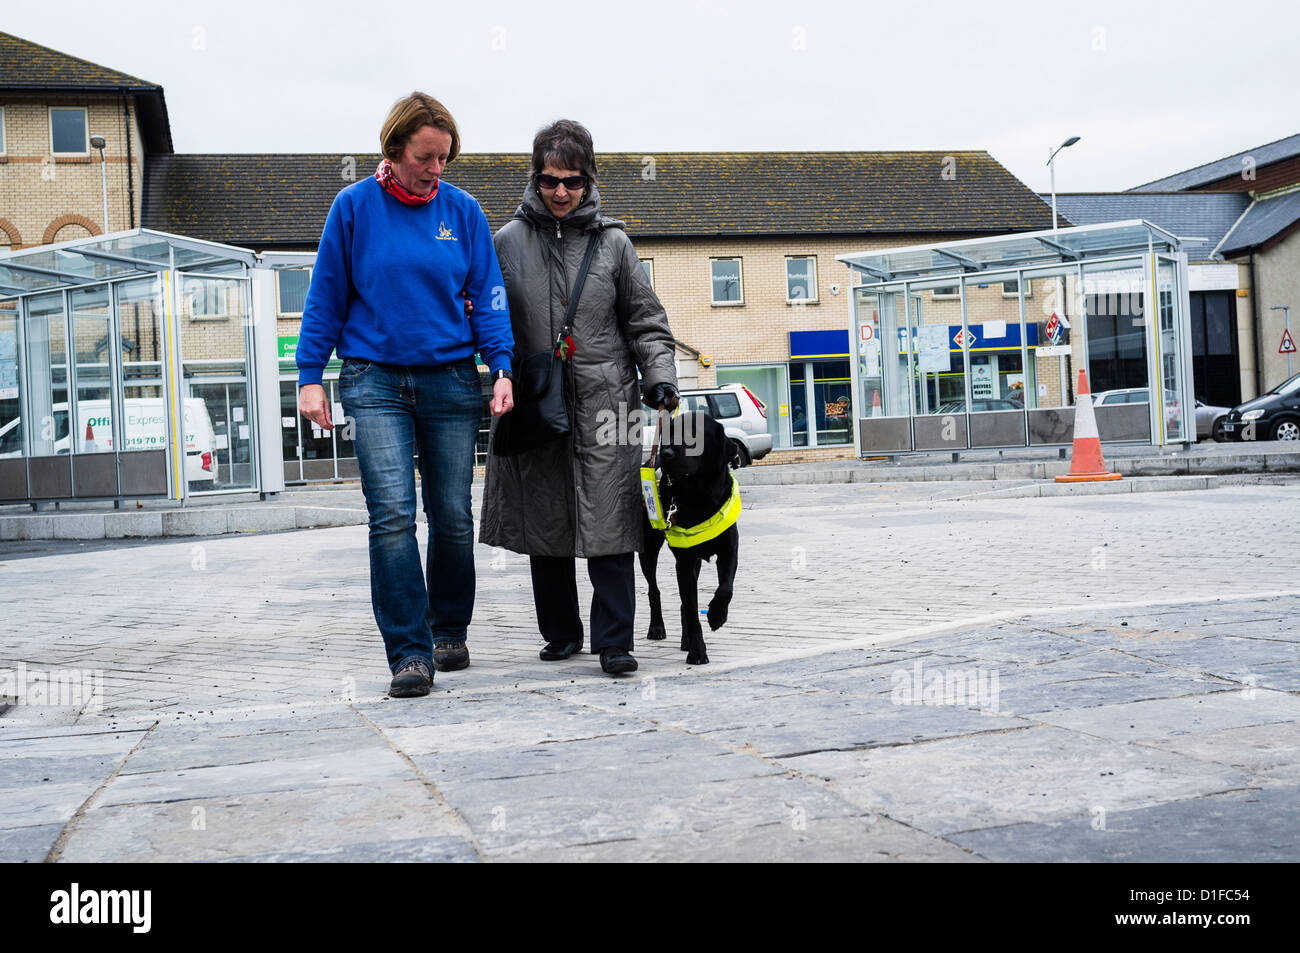 People assessing provision for blind and partially sighted at the new Aberystwyth bus terminal , wales UK Stock Photo